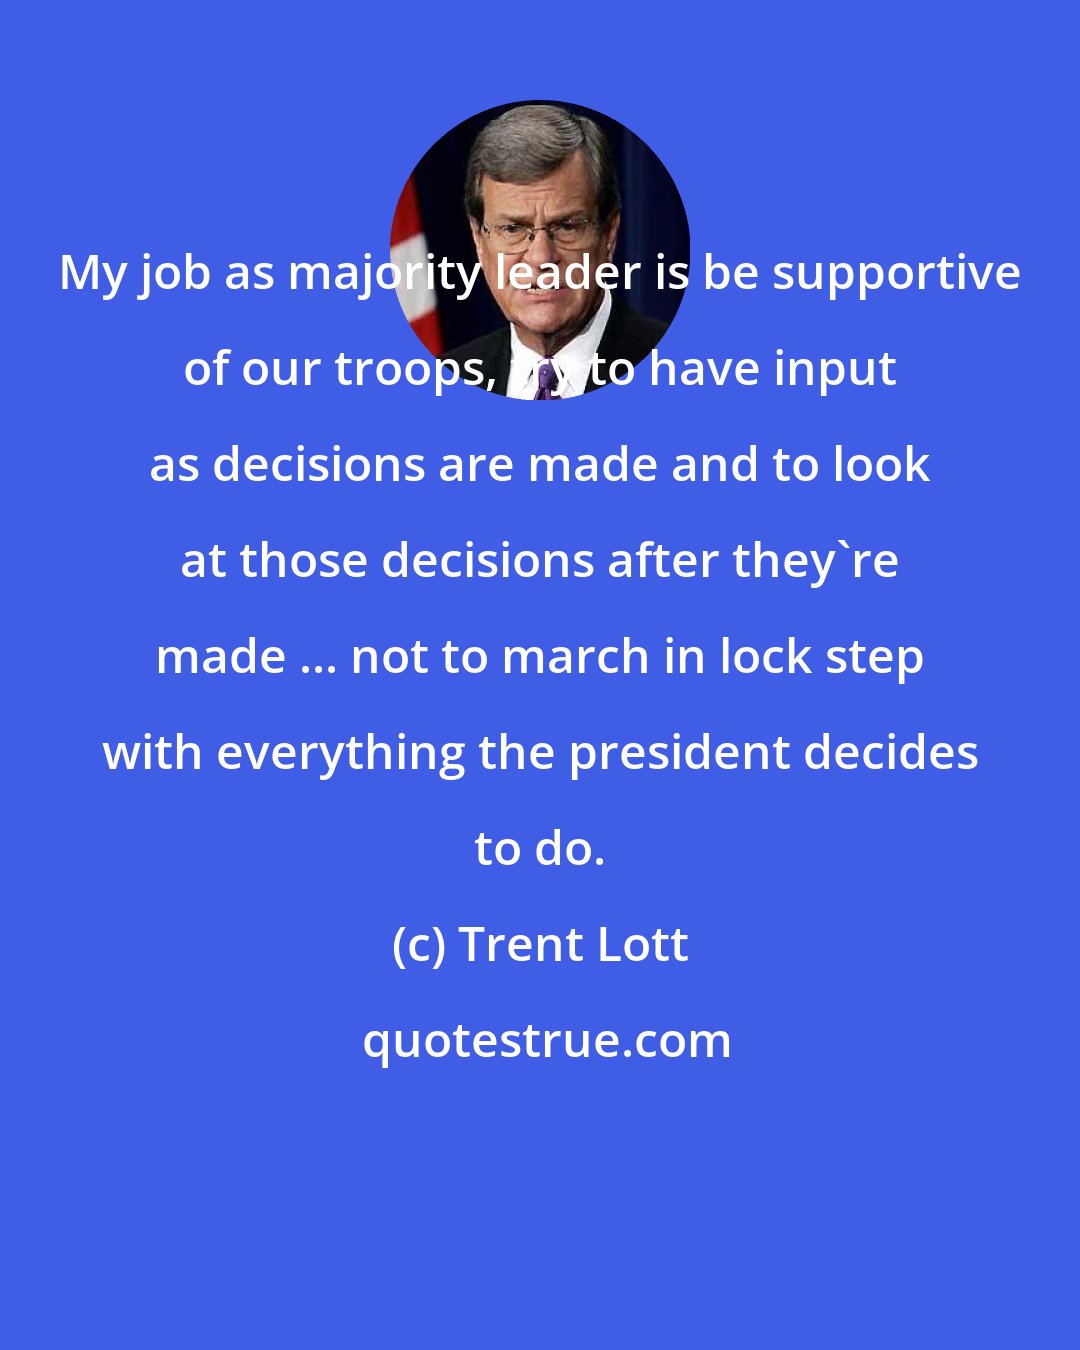 Trent Lott: My job as majority leader is be supportive of our troops, try to have input as decisions are made and to look at those decisions after they're made ... not to march in lock step with everything the president decides to do.